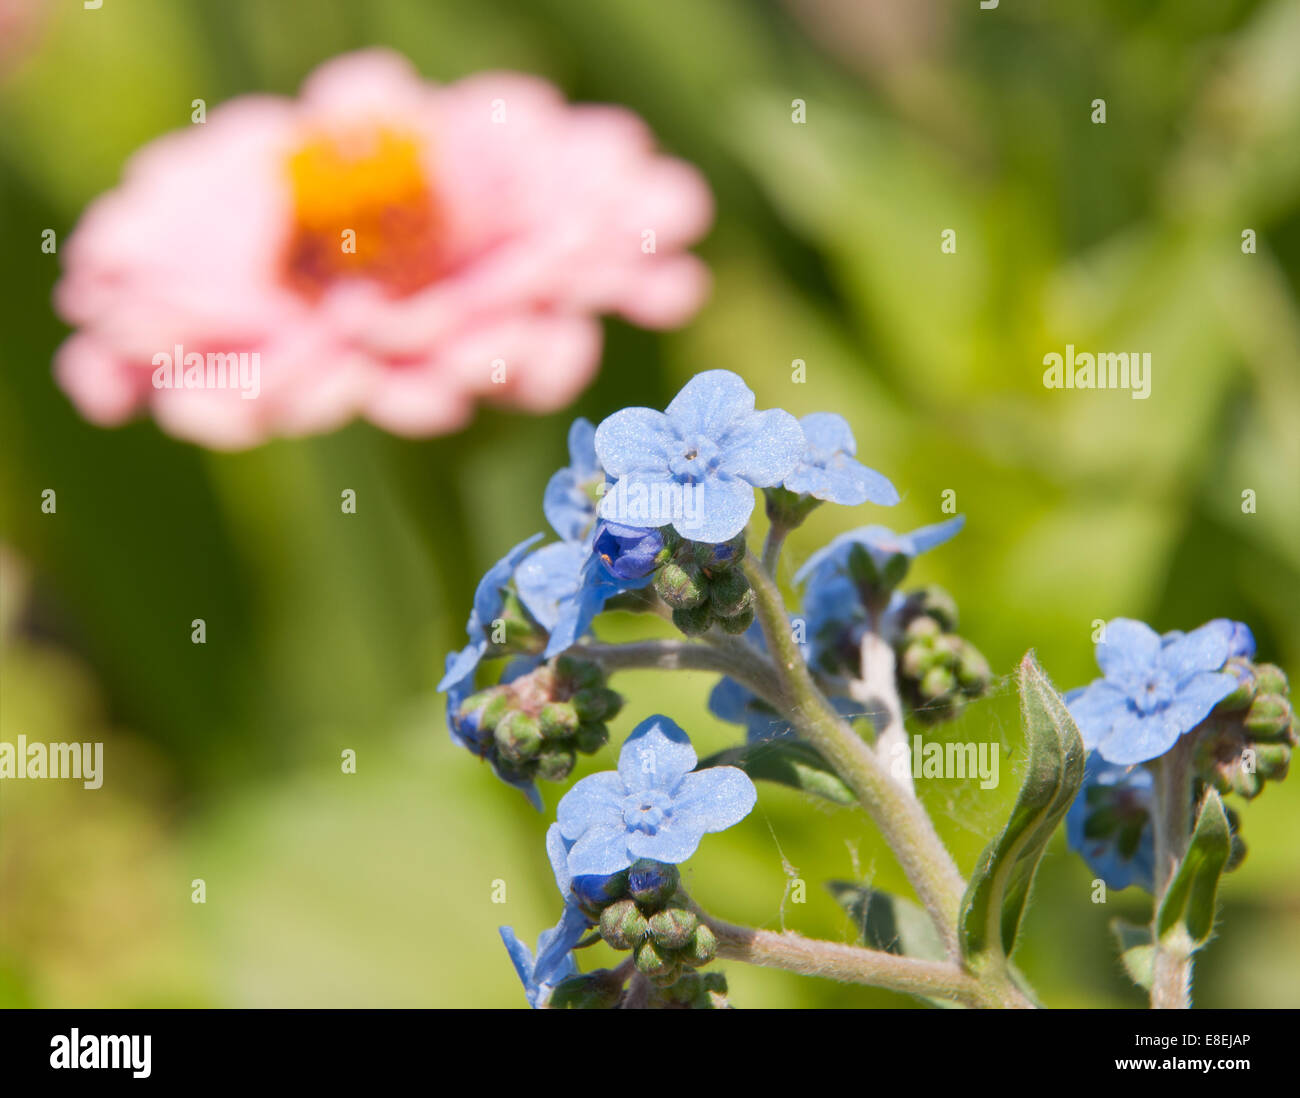 Baby blue Chinese Forget-me-not flowers in summer garden Stock Photo